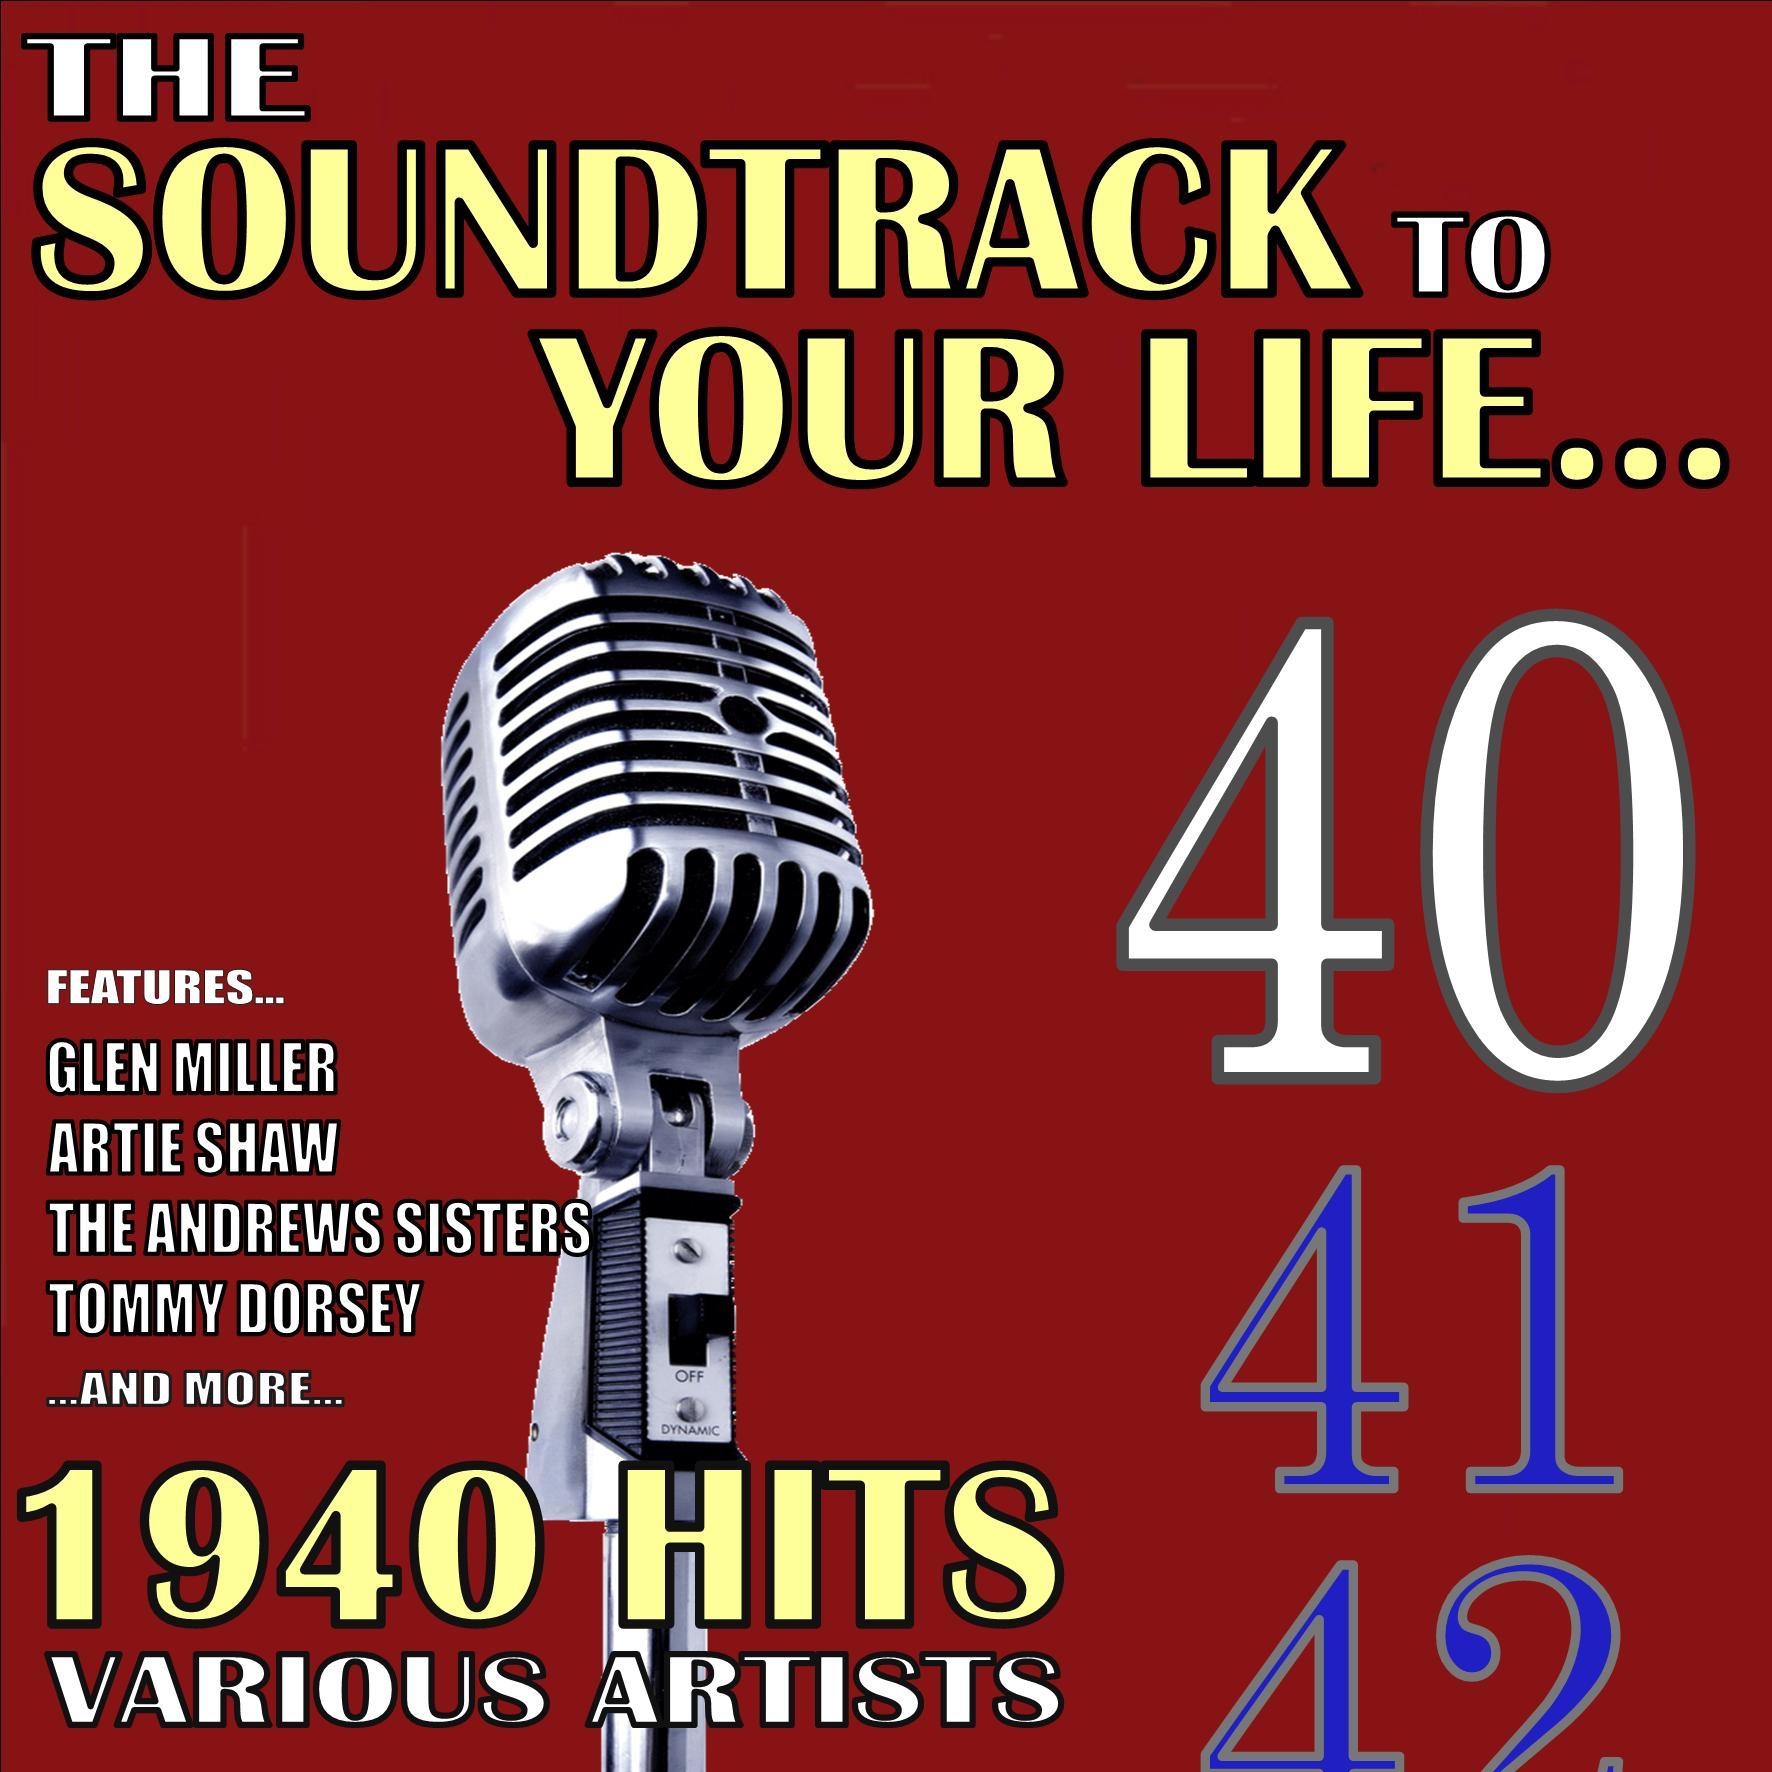 The Soundtrack to Your Life:1940 Hits